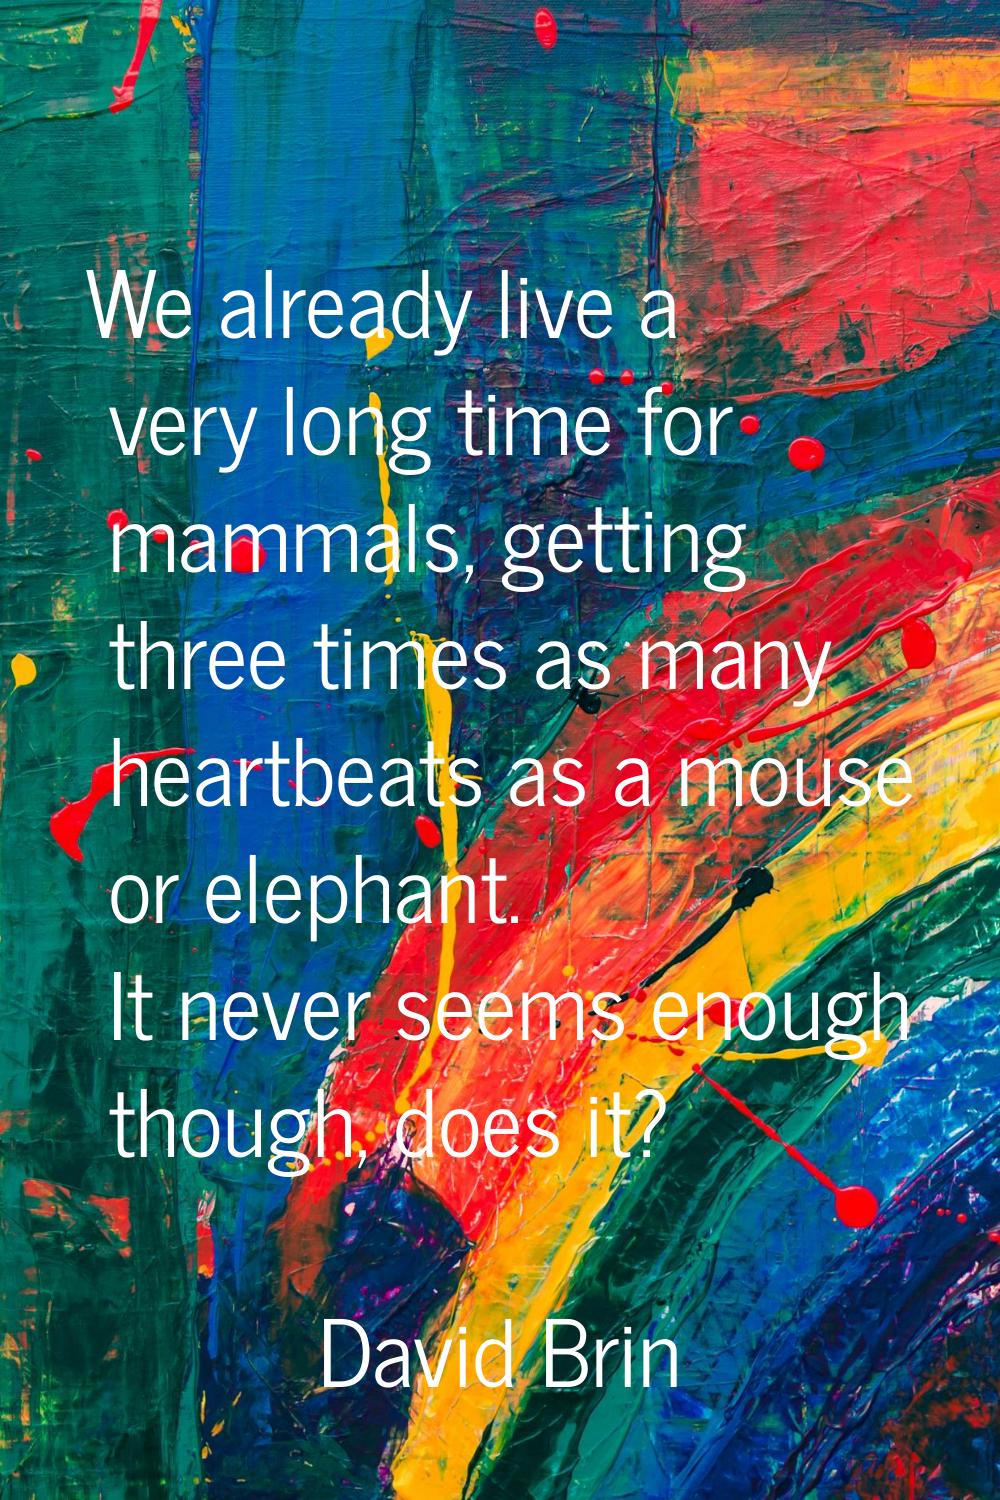 We already live a very long time for mammals, getting three times as many heartbeats as a mouse or 